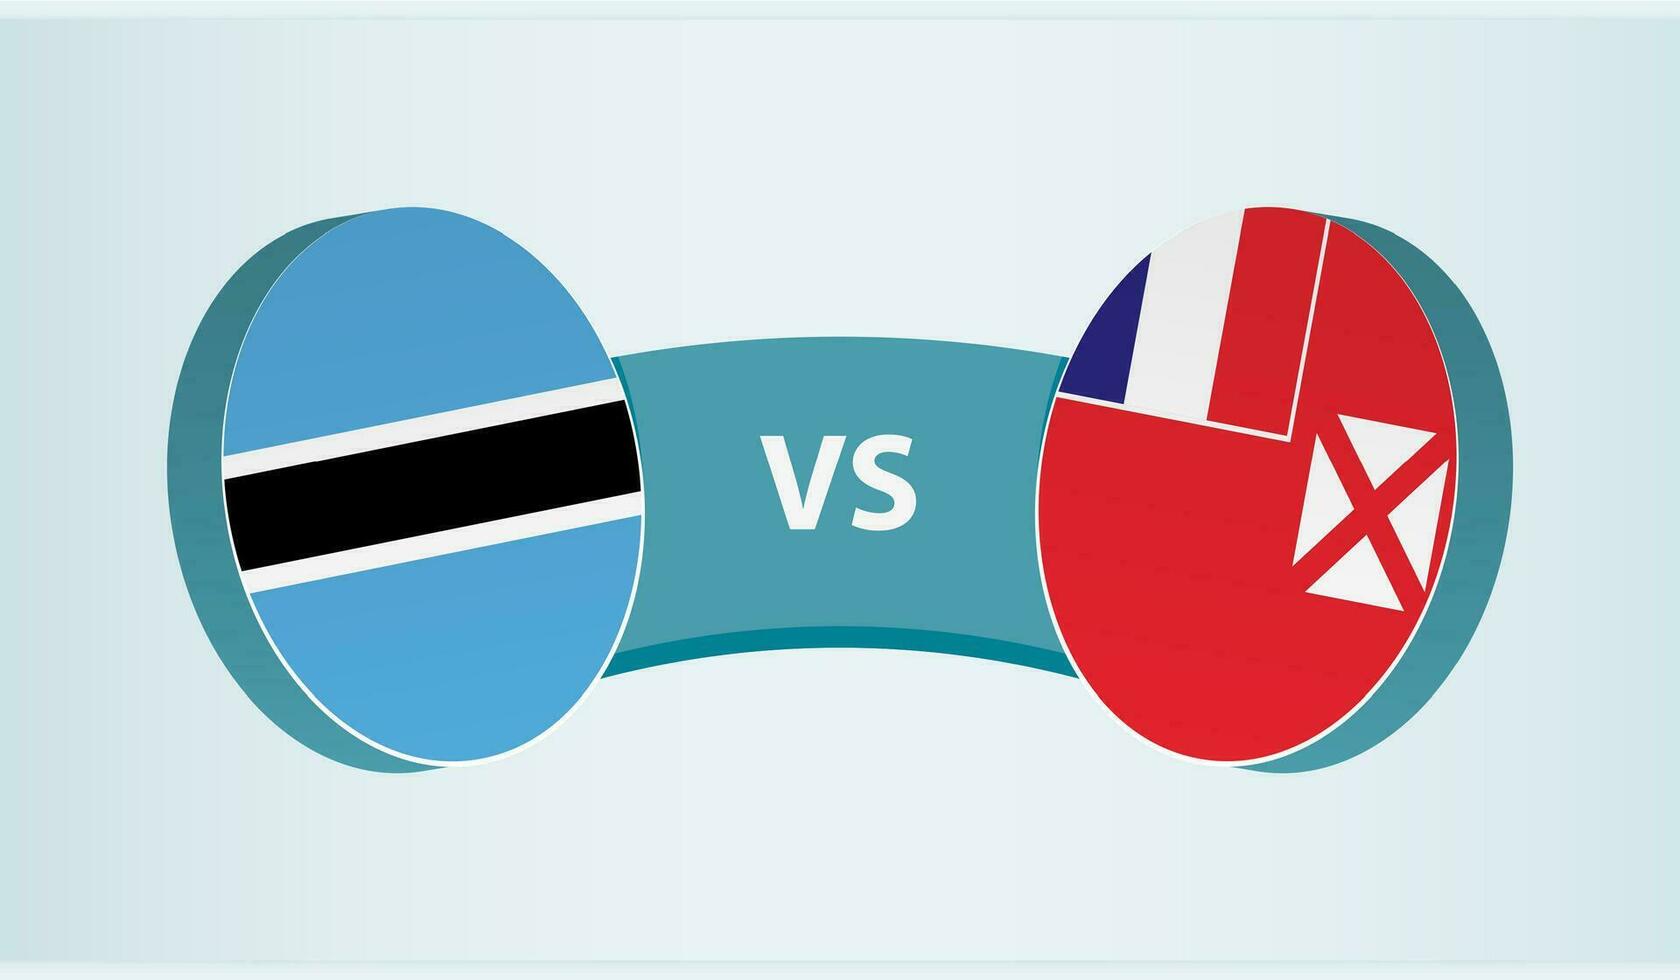 Botswana versus Wallis and Futuna, team sports competition concept. vector